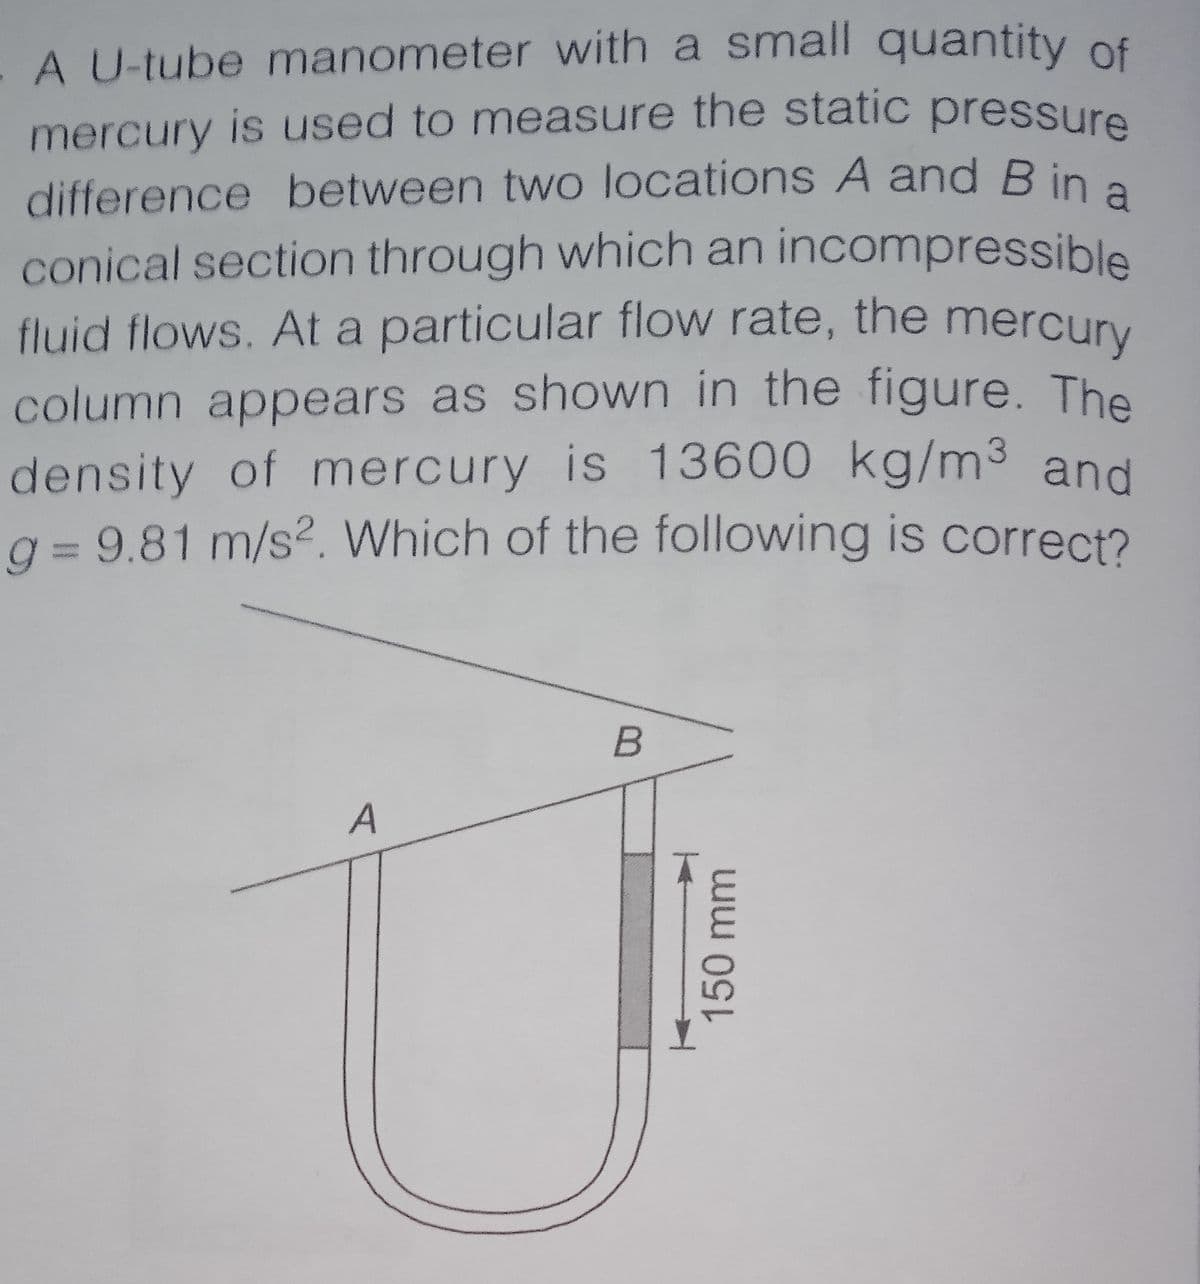 A U-tube manometer with a small quantity of
mercury is used to measure the static pressure
difference between two locations A and B in a
conical section through which an incompressible
fluid flows. At a particular flow rate, the mercury
column appears as shown in the figure. The
density of mercury is 13600 kg/m3 and
q = 9.81 m/s2. Which of the following is correct?
A
